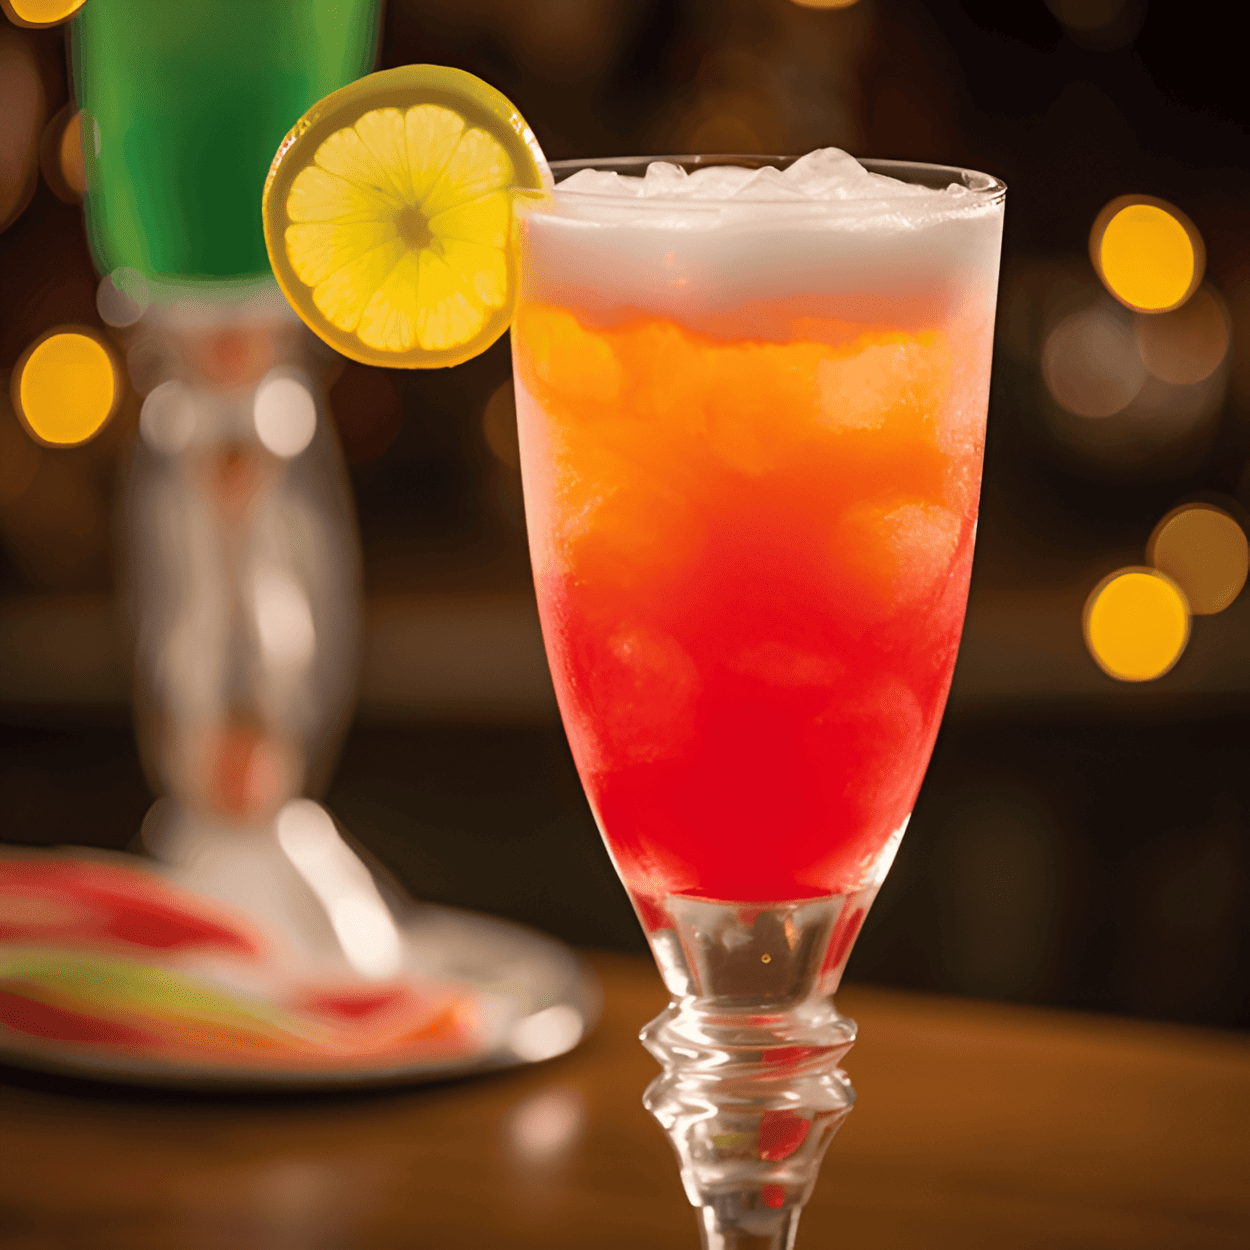 Laffy Taffy Cocktail Recipe - The Laffy Taffy cocktail is a sweet, fruity concoction with a tangy kick. The combination of banana liqueur, peach schnapps, and cranberry juice gives it a tropical, candy-like flavor that's balanced by the tartness of the lemon juice.